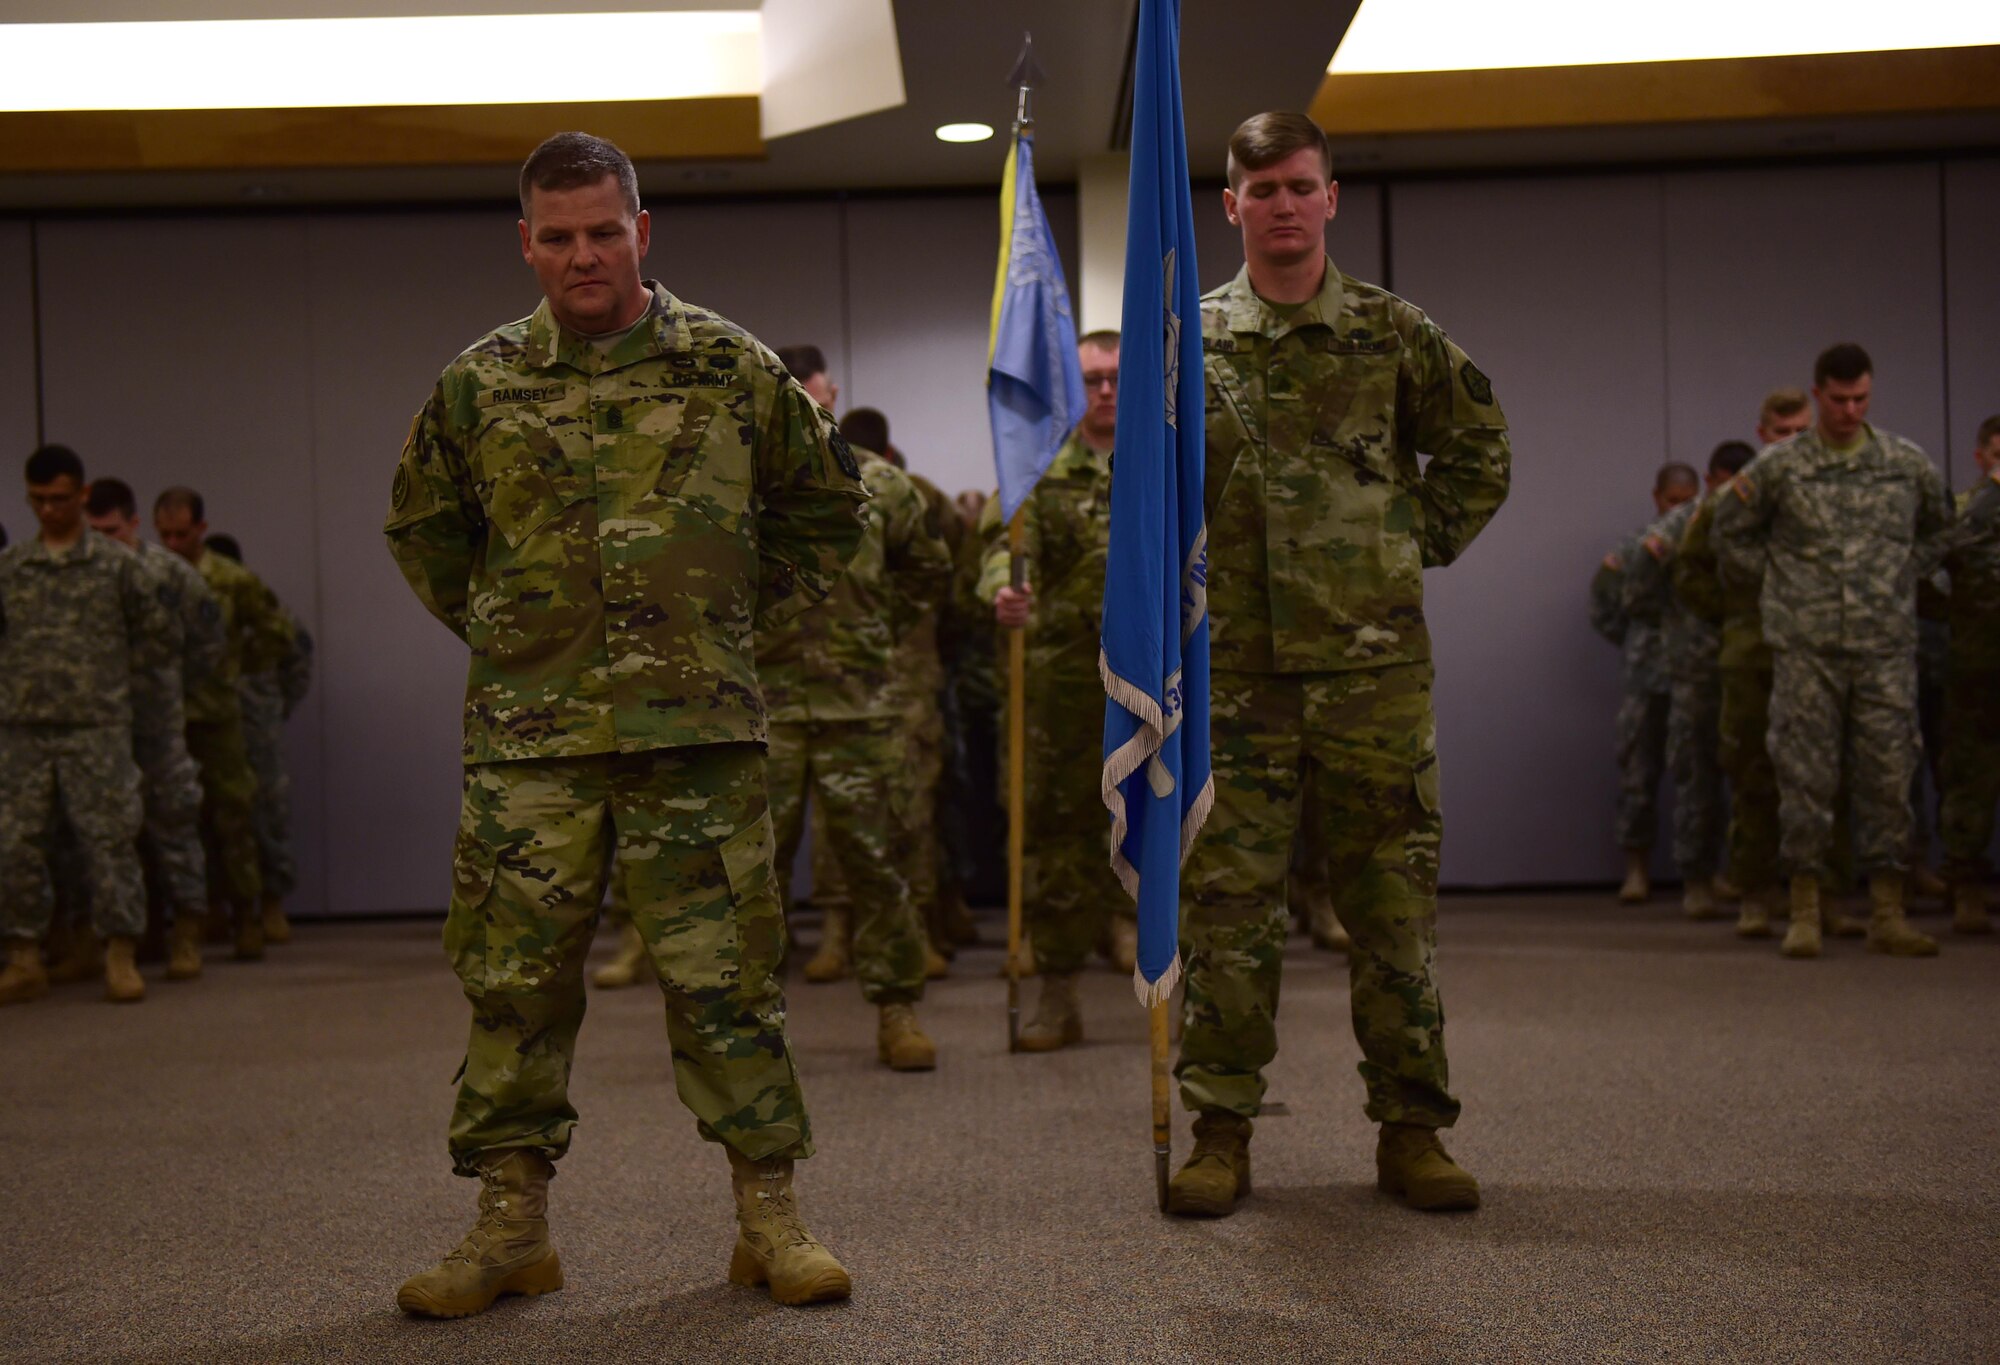 Command Sgt. Maj. Raymond S. Ramsey, outgoing 743d Military Intelligence Battalion command sergeant major, stands silently during a prayer Feb. 5, 2016, at Building 706 on Buckley Air Force Base. Ramsey relinquished command to Command Sgt. Maj. Kristin Grover, incoming 743d MI Battalion command sergeant major, during a change of responsibility ceremony. (U.S. Air Force photo by Airman 1st Class Gabrielle Spradling/Released)